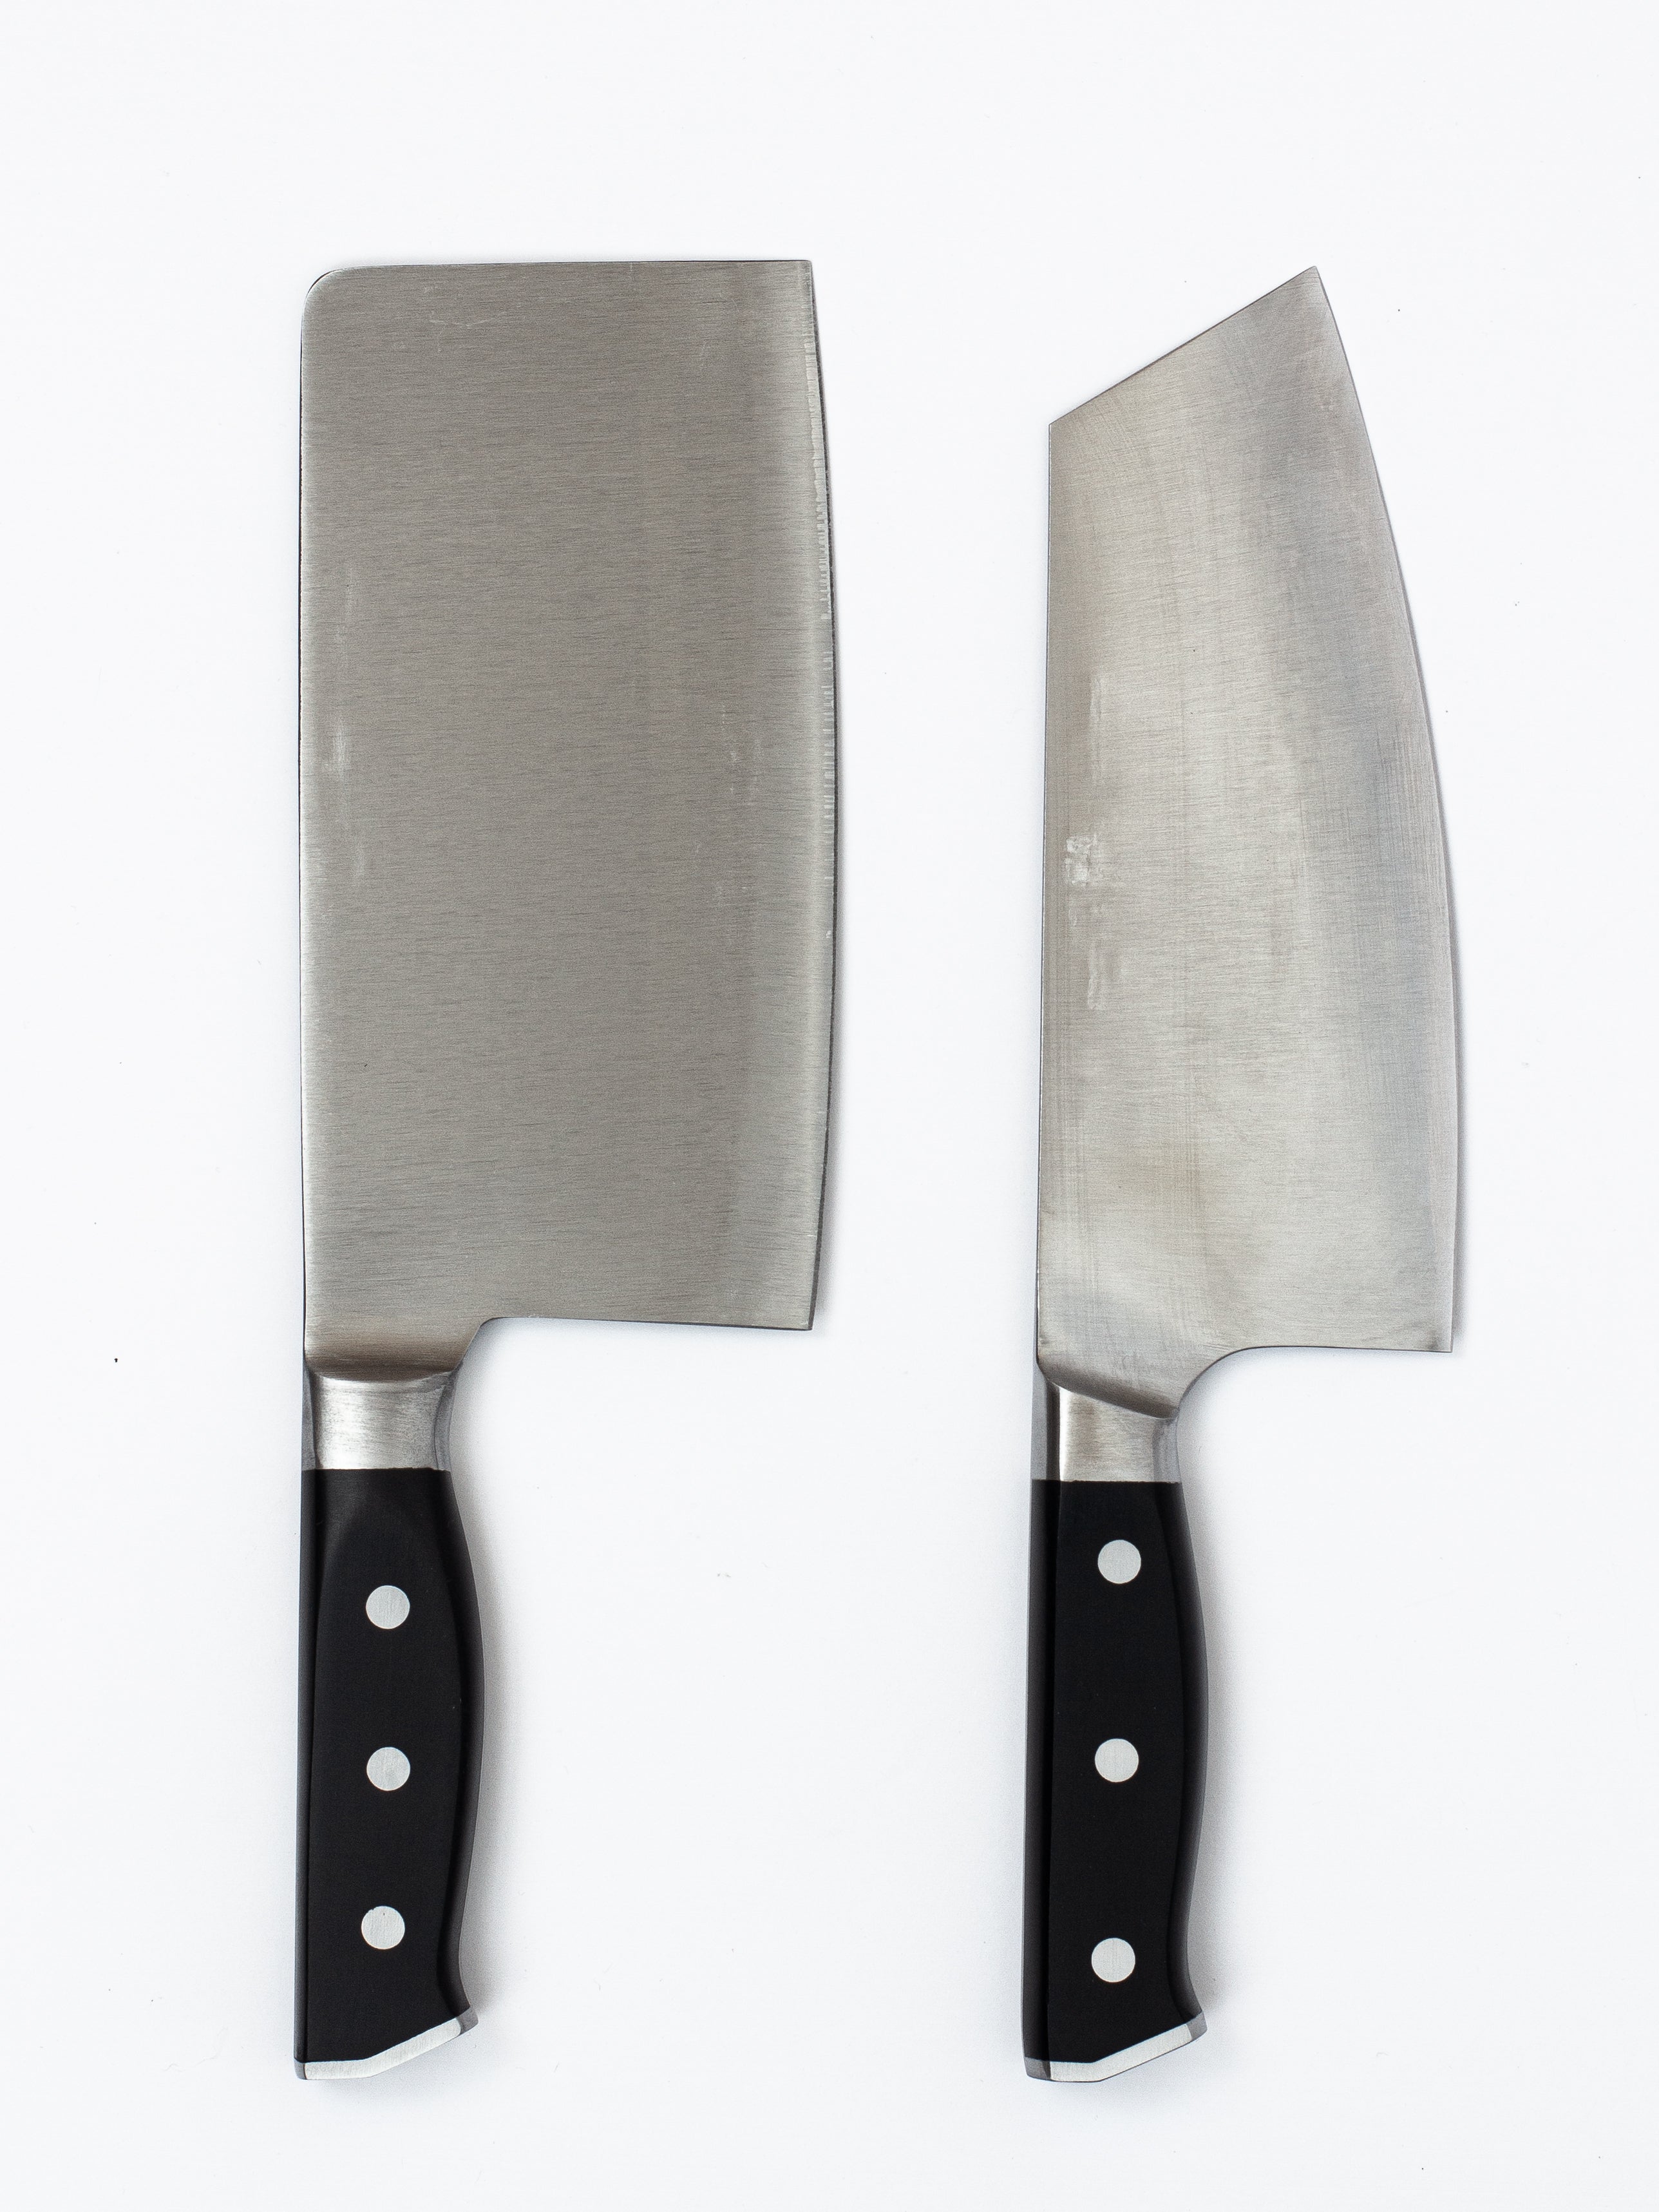 Wholesale Stainless Steel Knives in 3 Sizes - Bulk Knife Sets, Cutlery